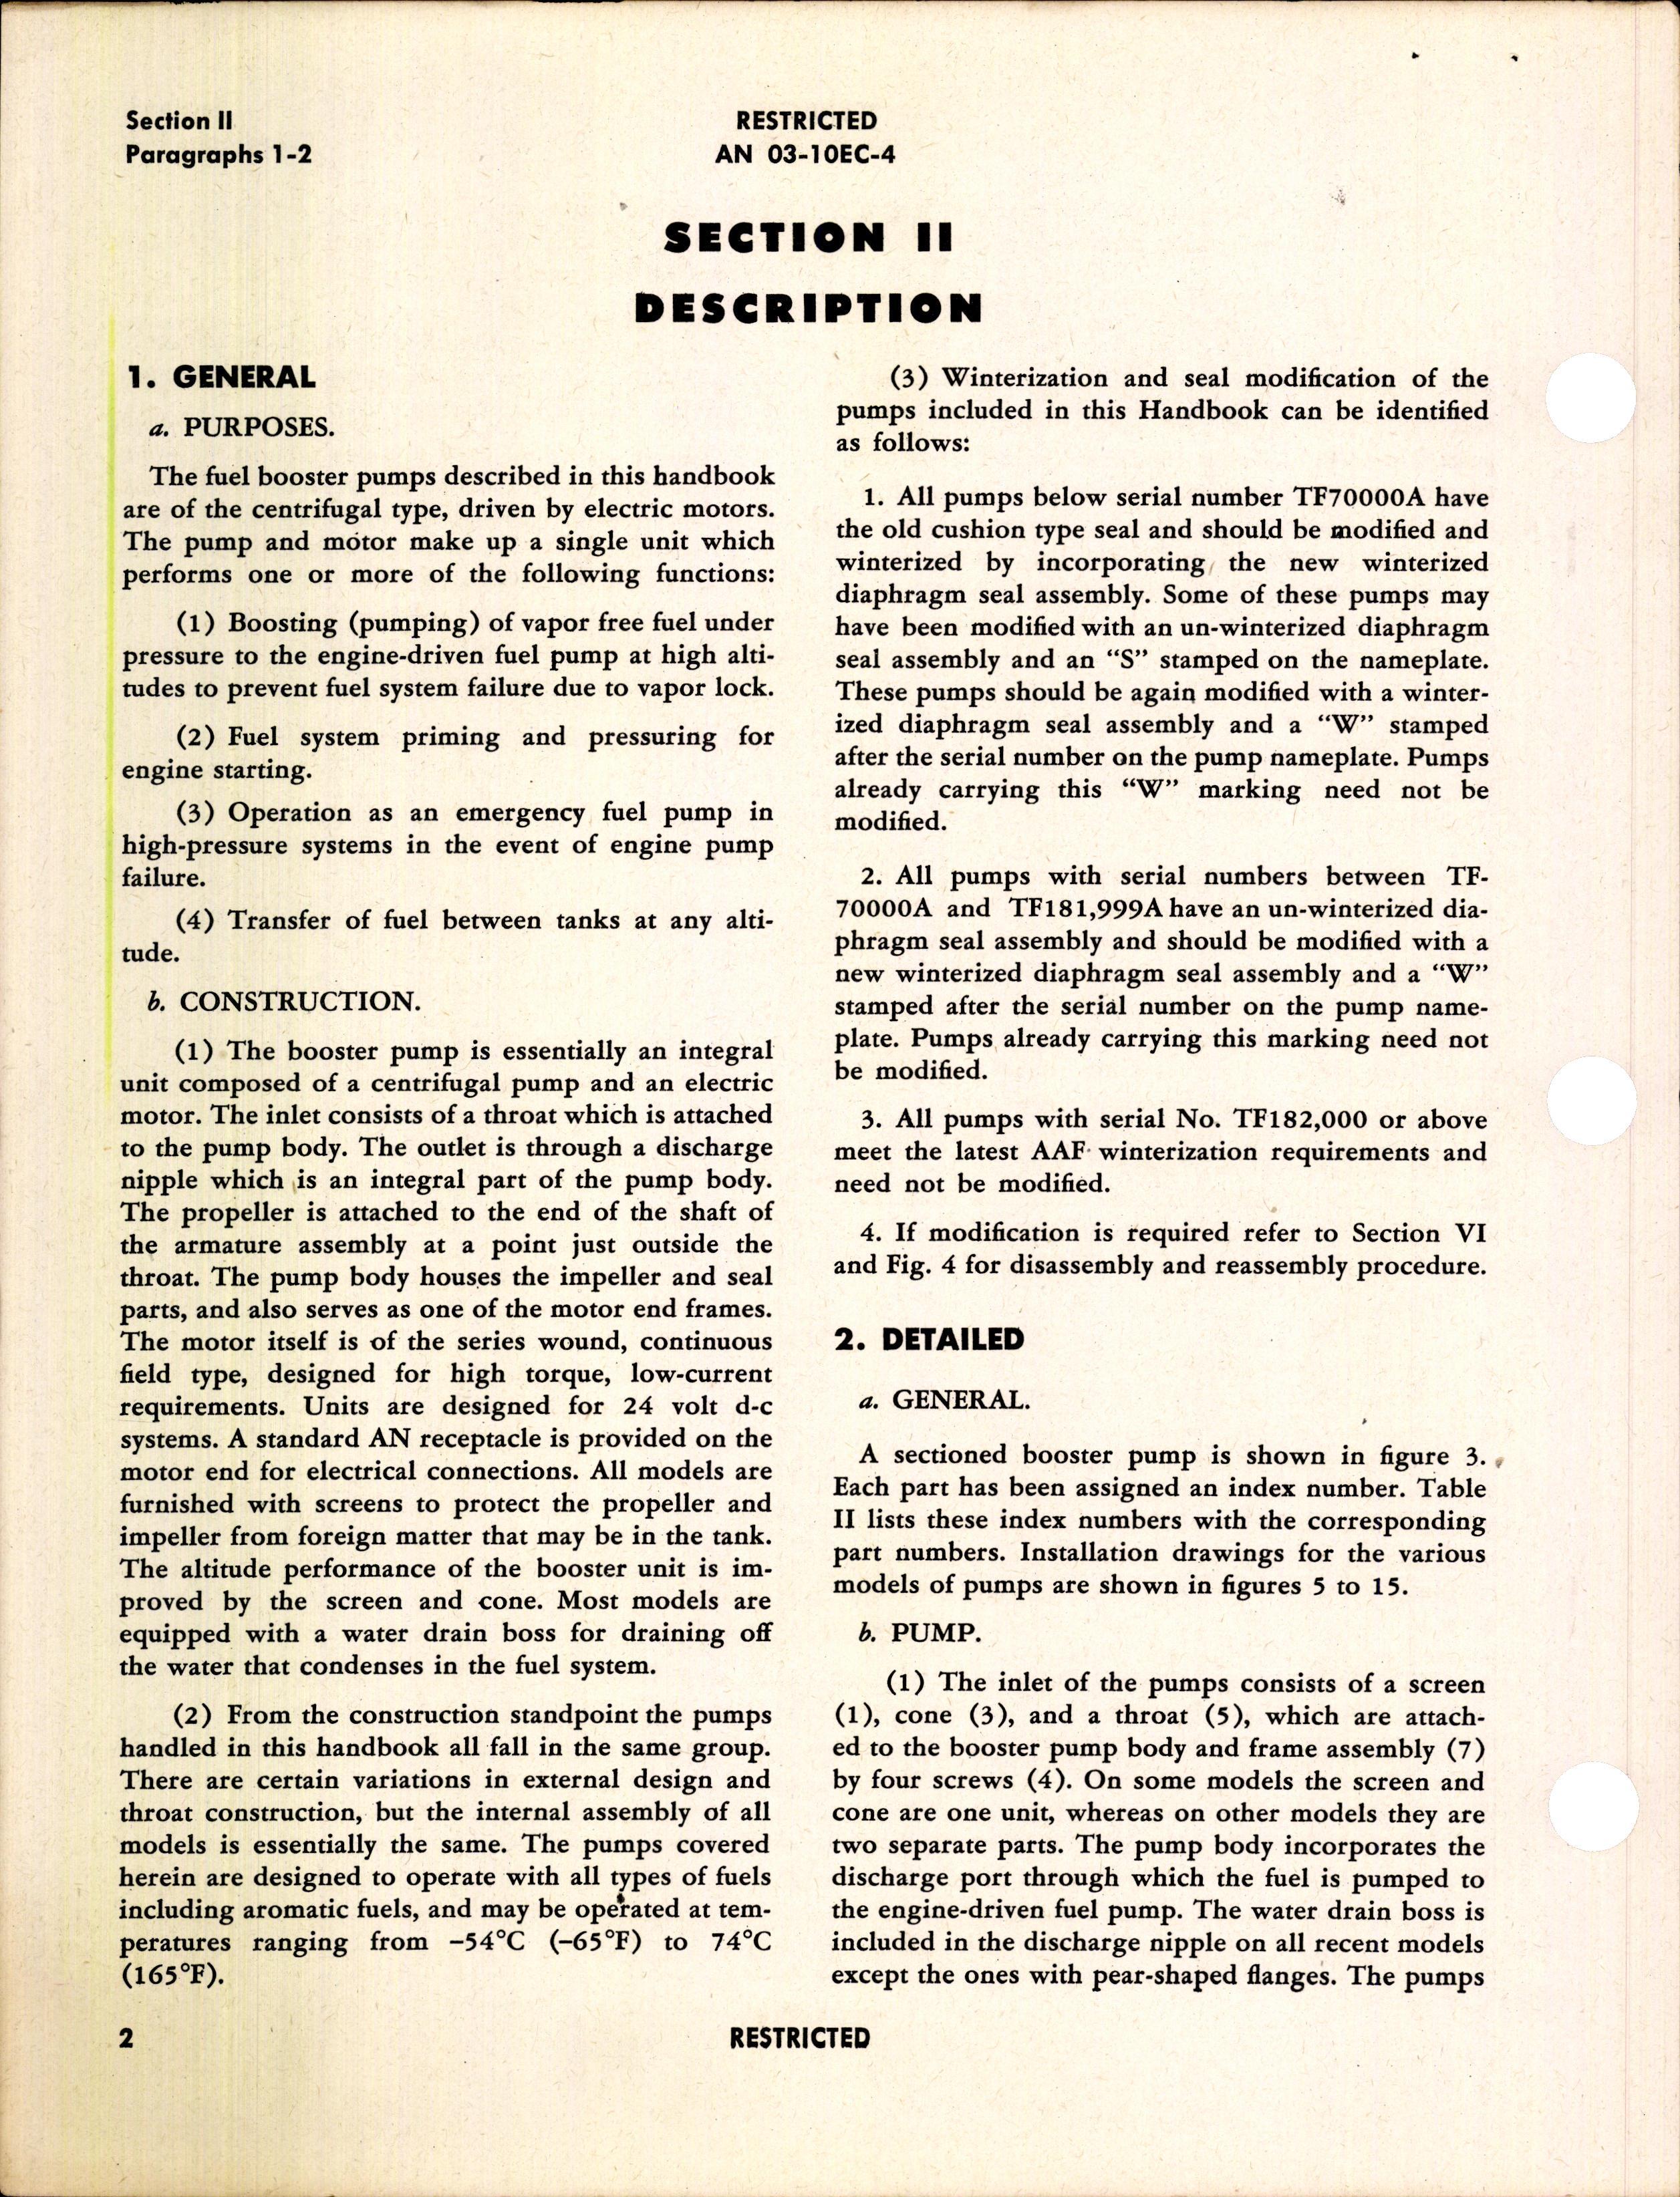 Sample page 6 from AirCorps Library document: Operation, Service, & Overhaul Instructions with Parts Catalog for Thompson Fuel Booster Pumps